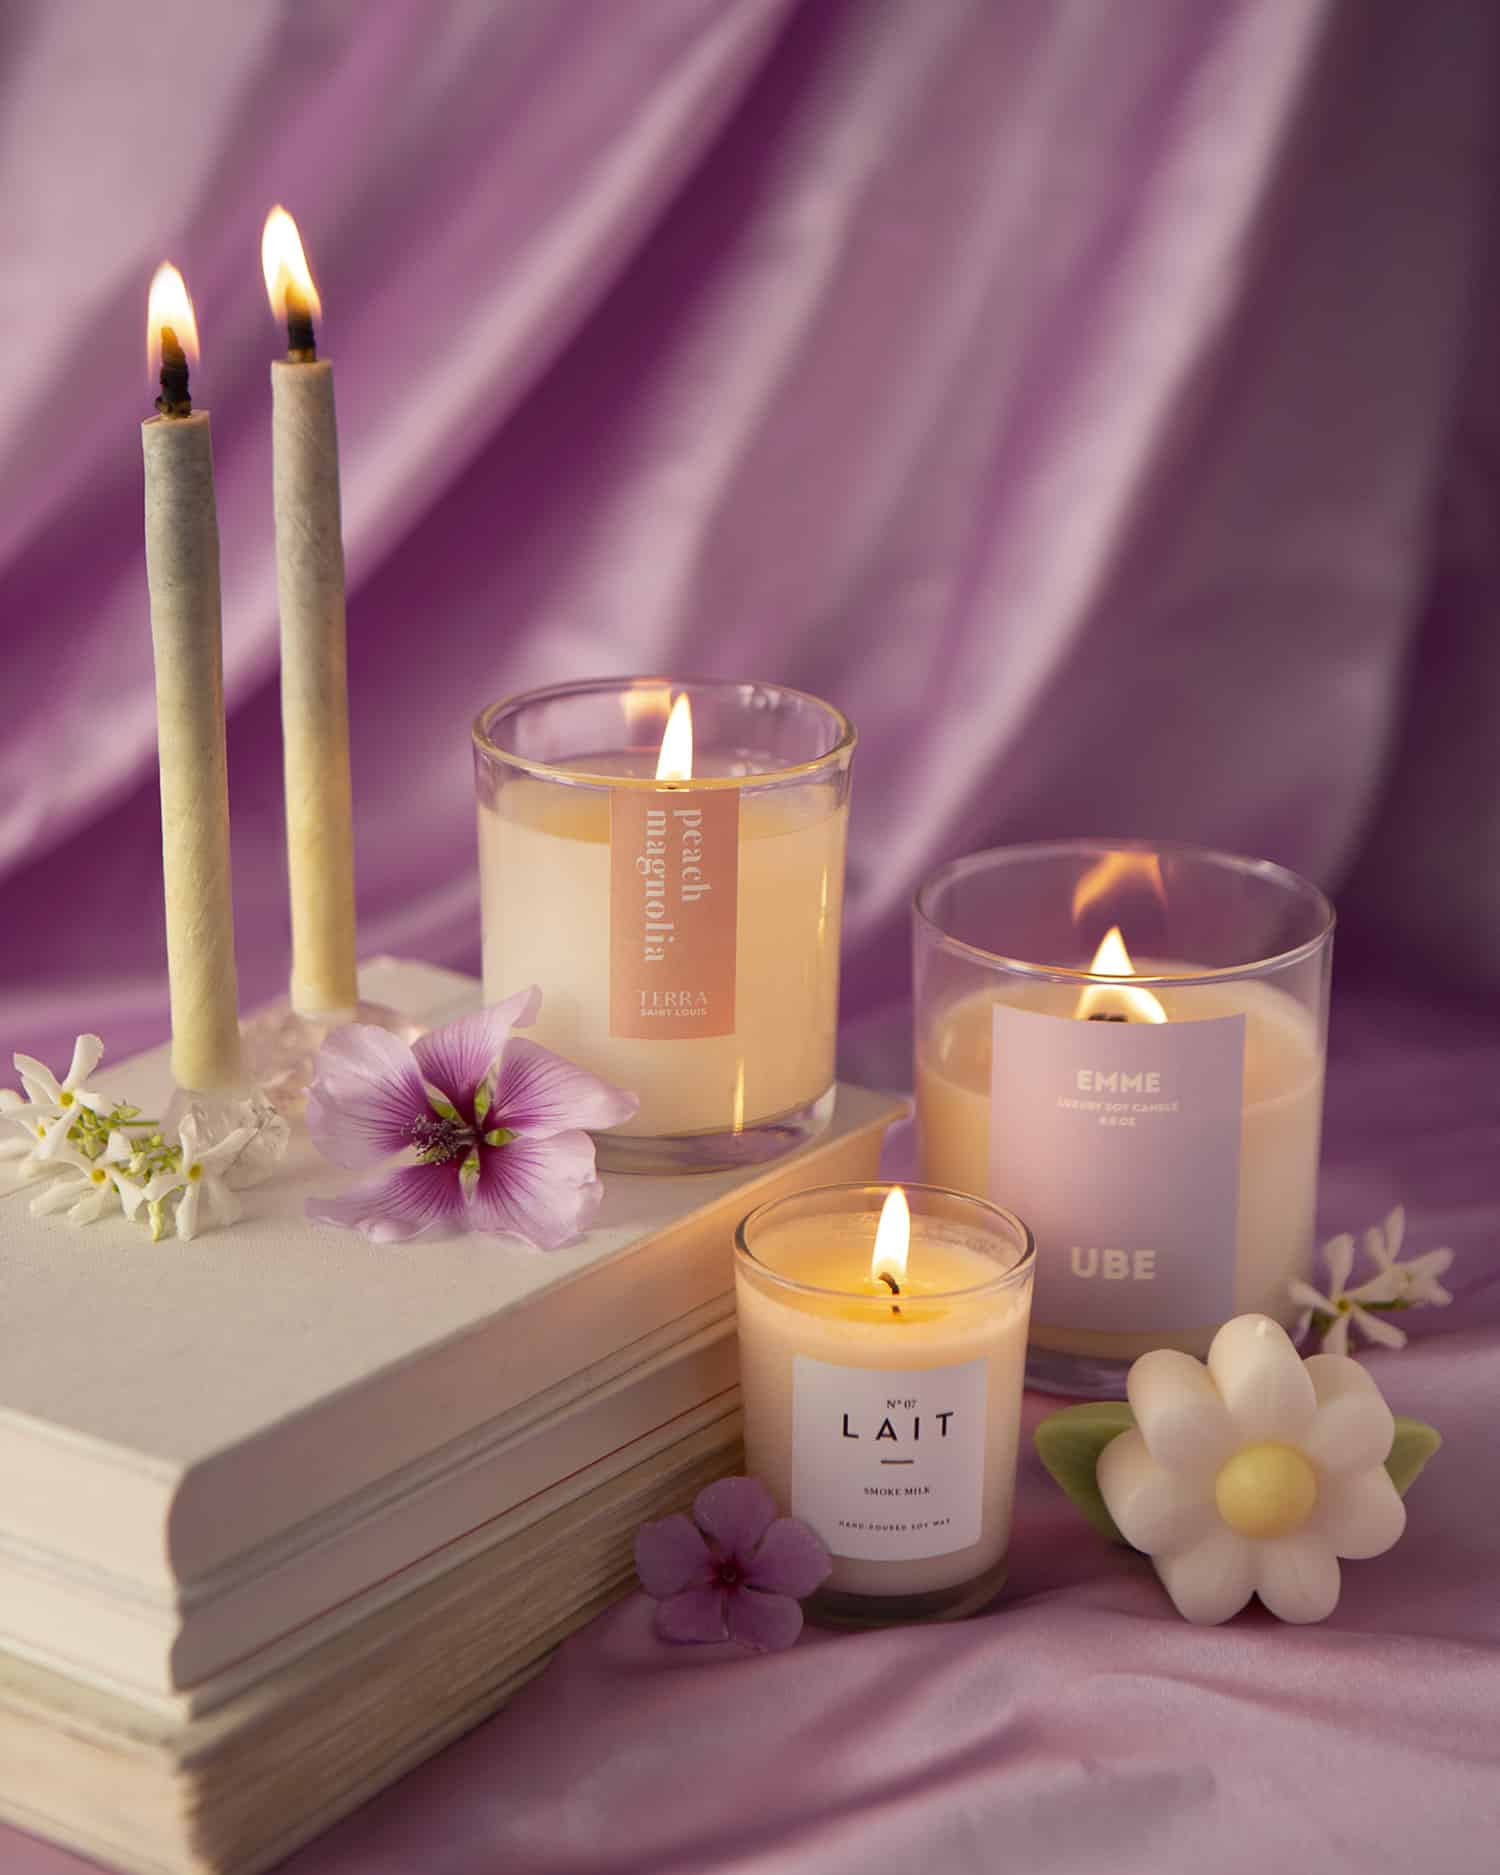 4 Best Scented Candle Fragrance for Working at Home